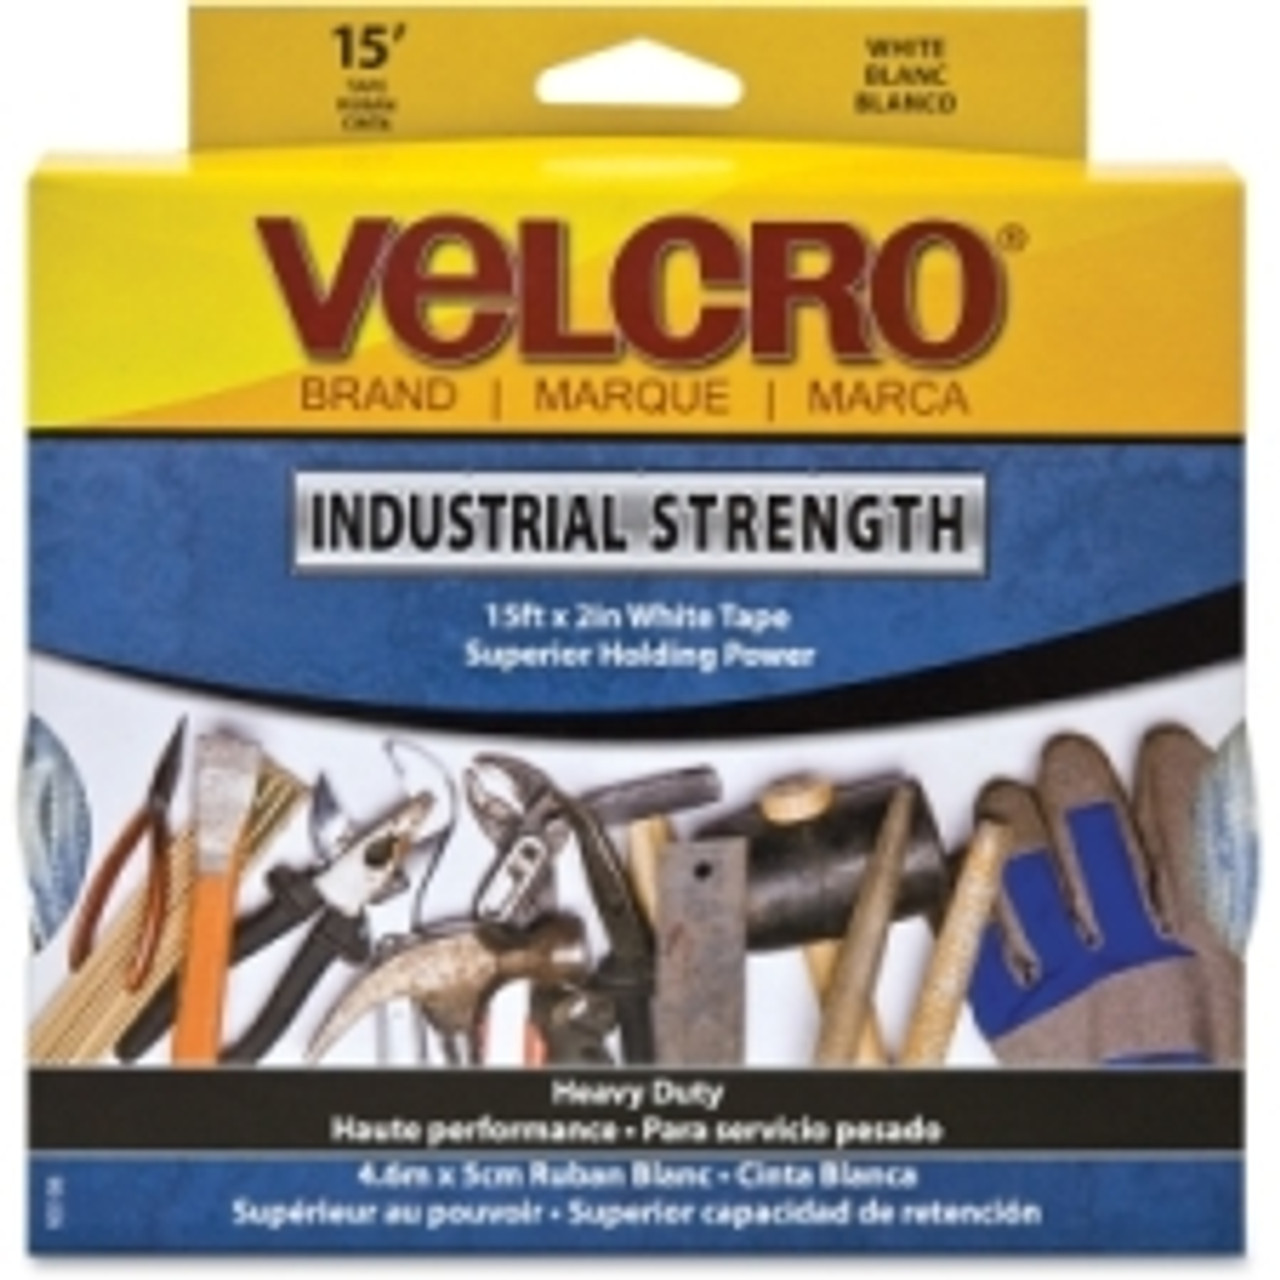 VELCRO Brand Industrial Strength 4ft x 2in White Hook and Loop